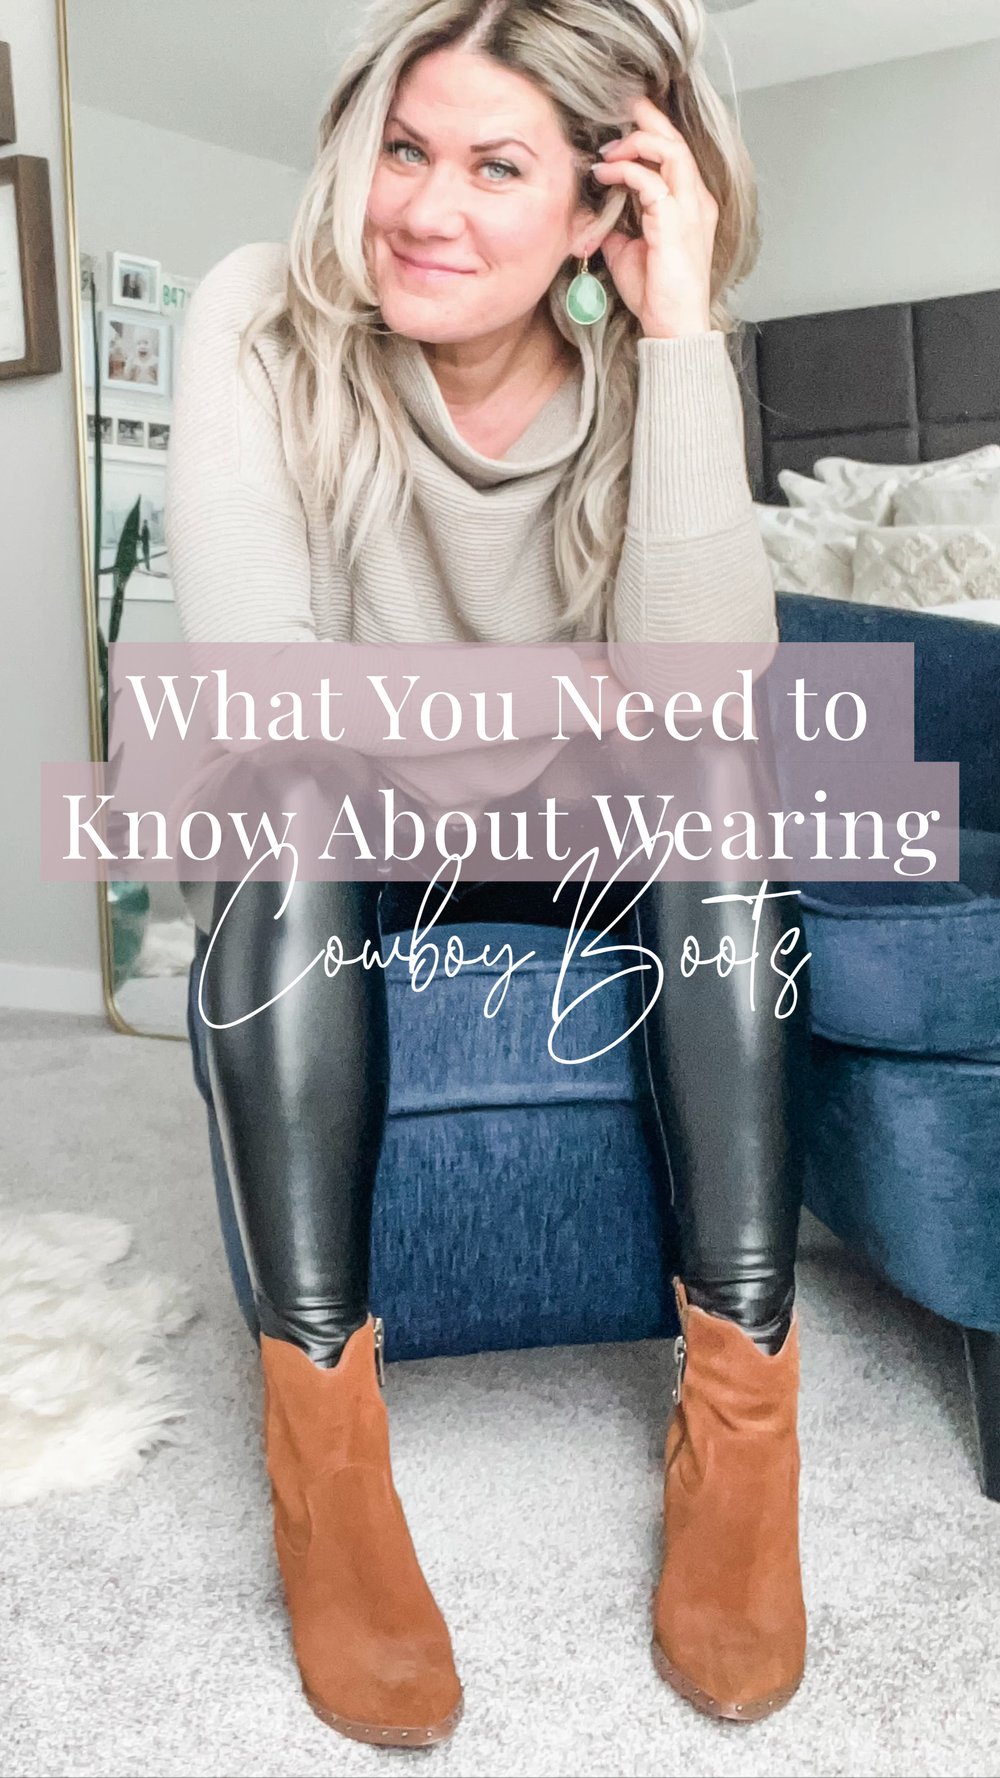 3 Ways I'm Wearing Cowboy Boots & Jeans Now - The Mom Edit